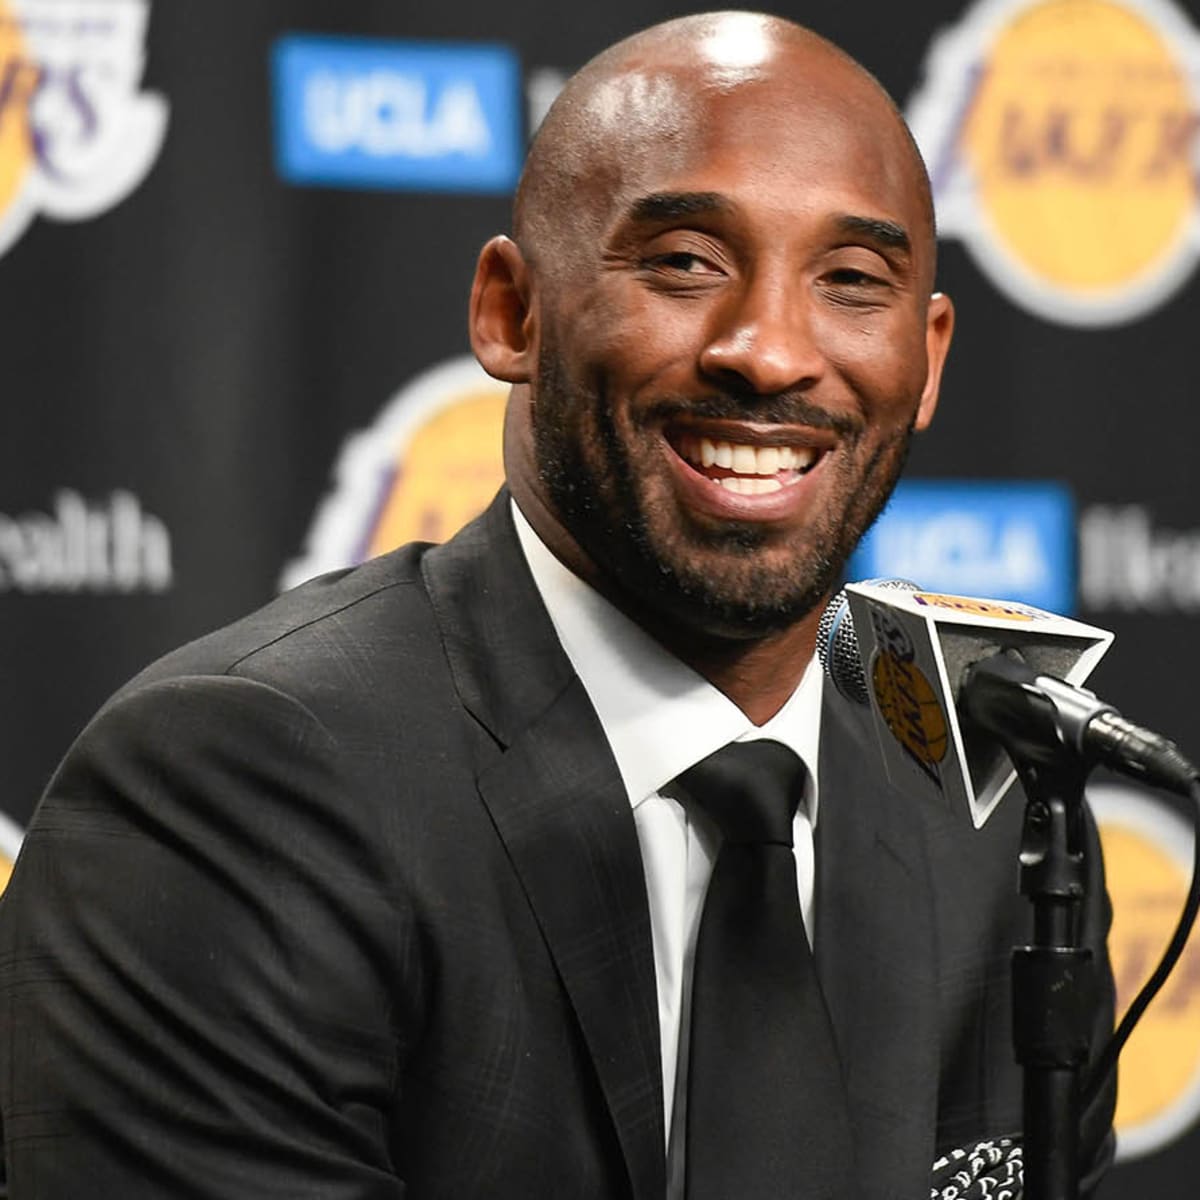 From the Vault: Kobe Bryant's Hall of Fame career on our front